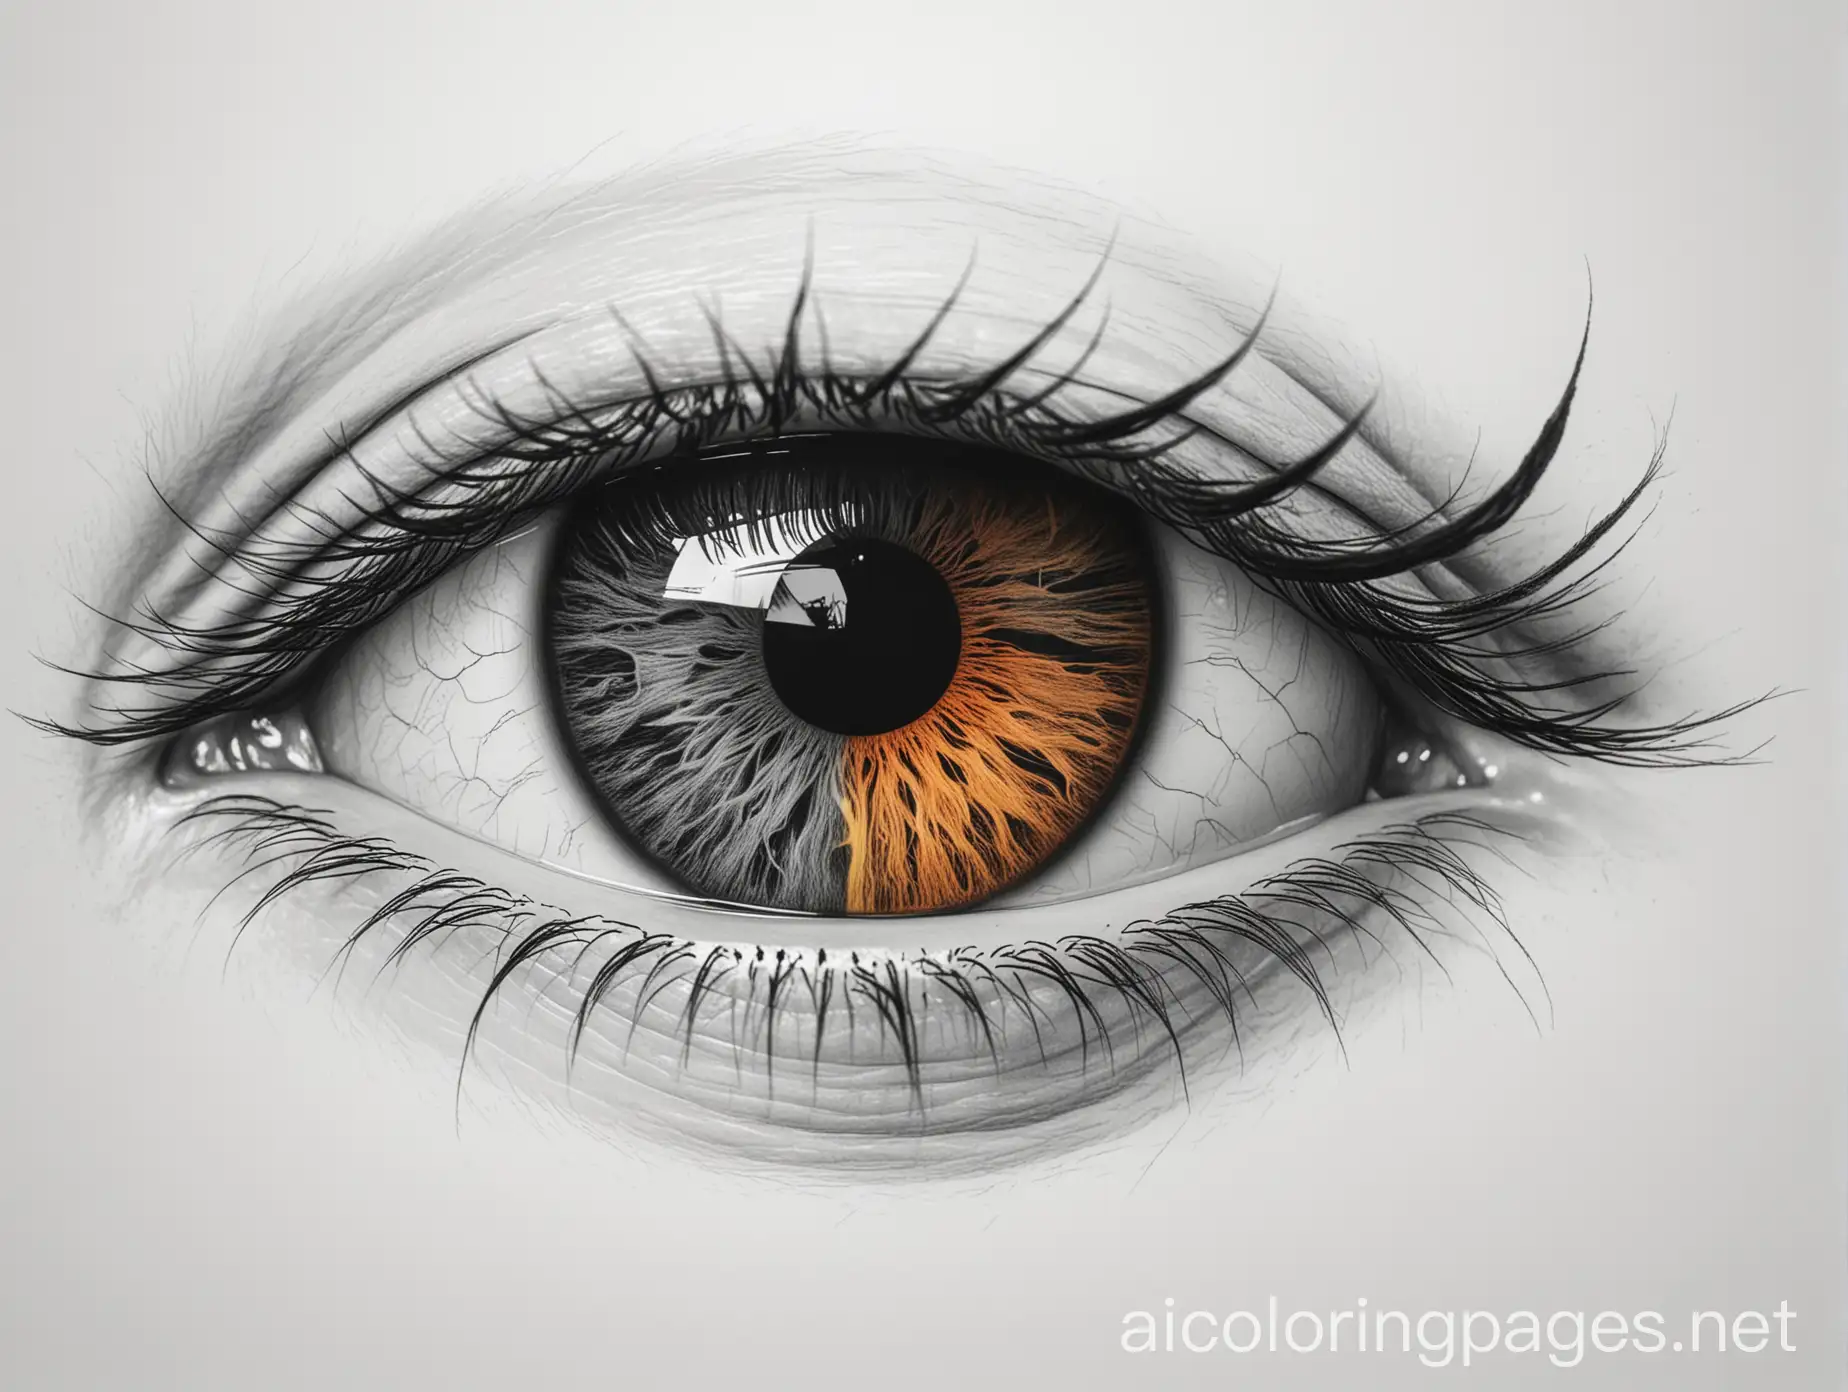 Realistic-Eye-of-the-Devil-Coloring-Page-in-Color-and-Black-and-White